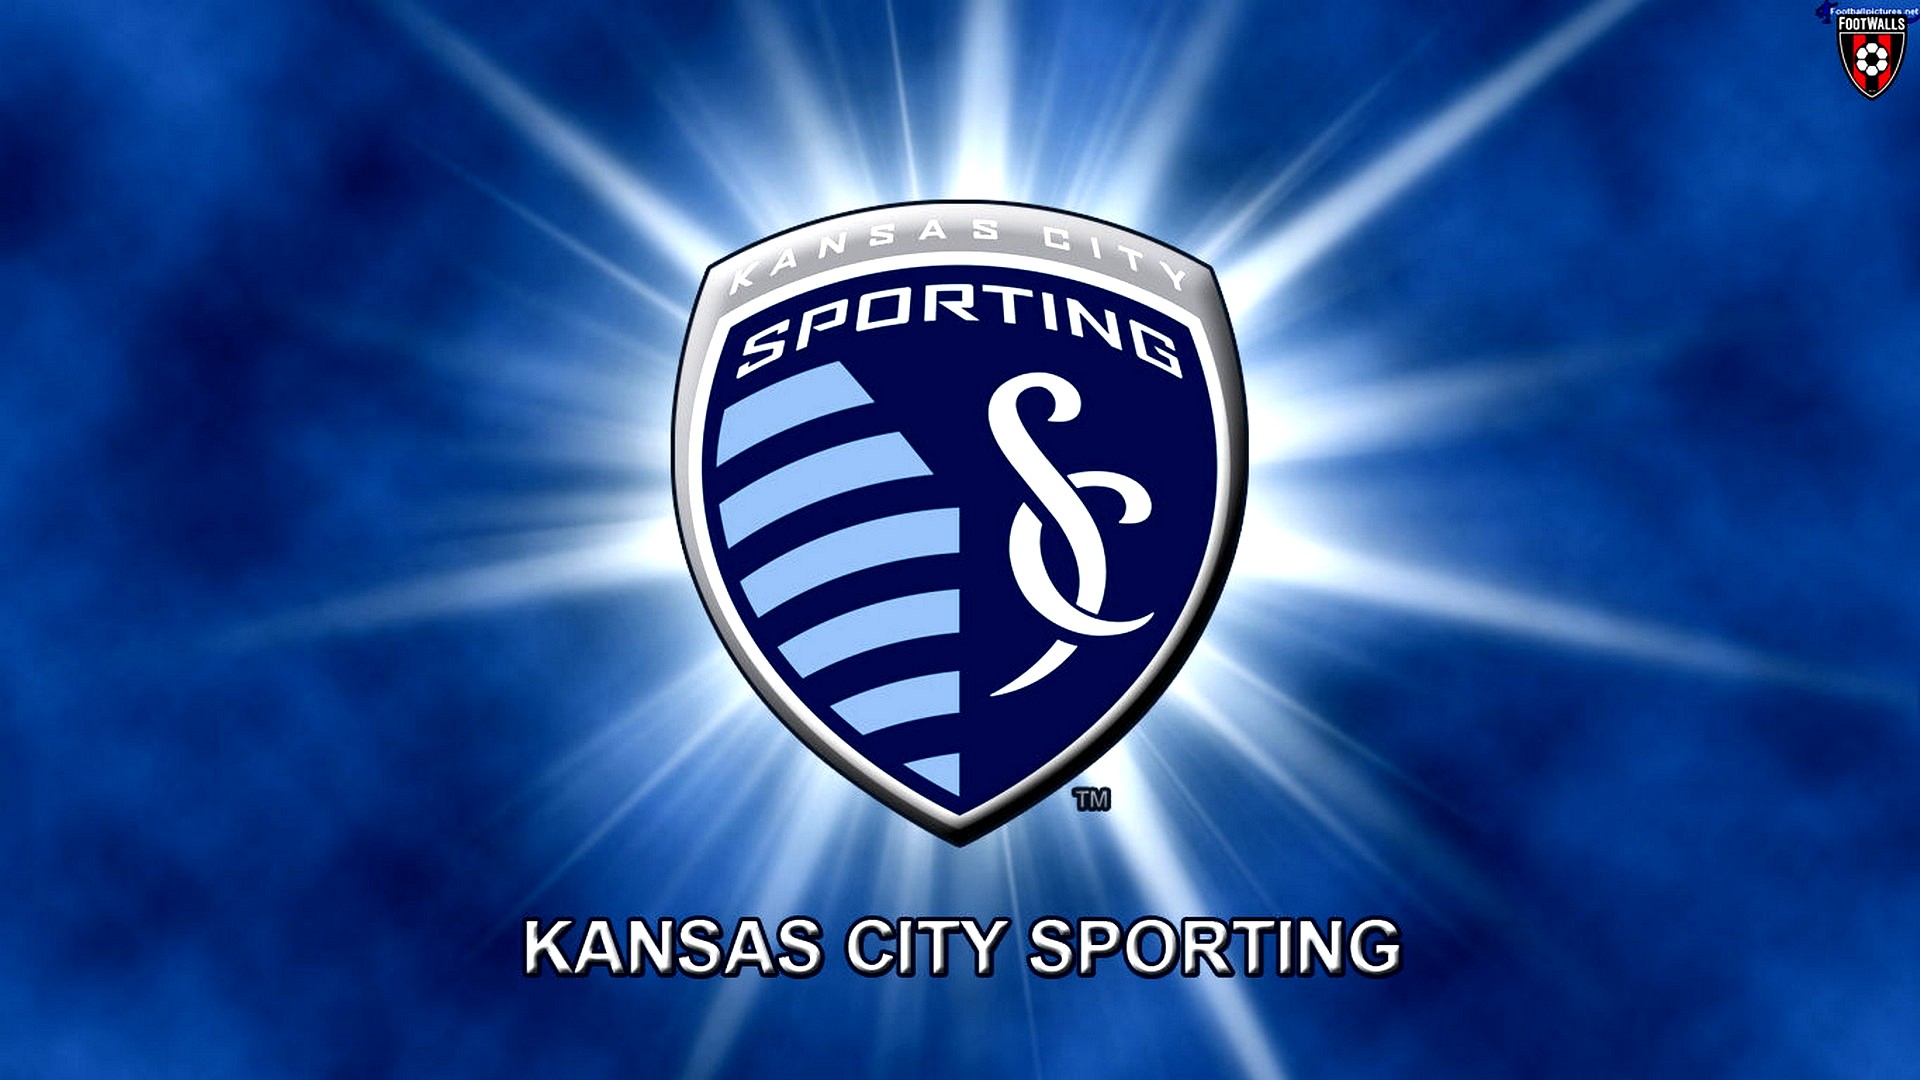 Sporting KC For Mac Wallpaper with high-resolution 1920x1080 pixel. You can use this wallpaper for your Desktop Computers, Mac Screensavers, Windows Backgrounds, iPhone Wallpapers, Tablet or Android Lock screen and another Mobile device